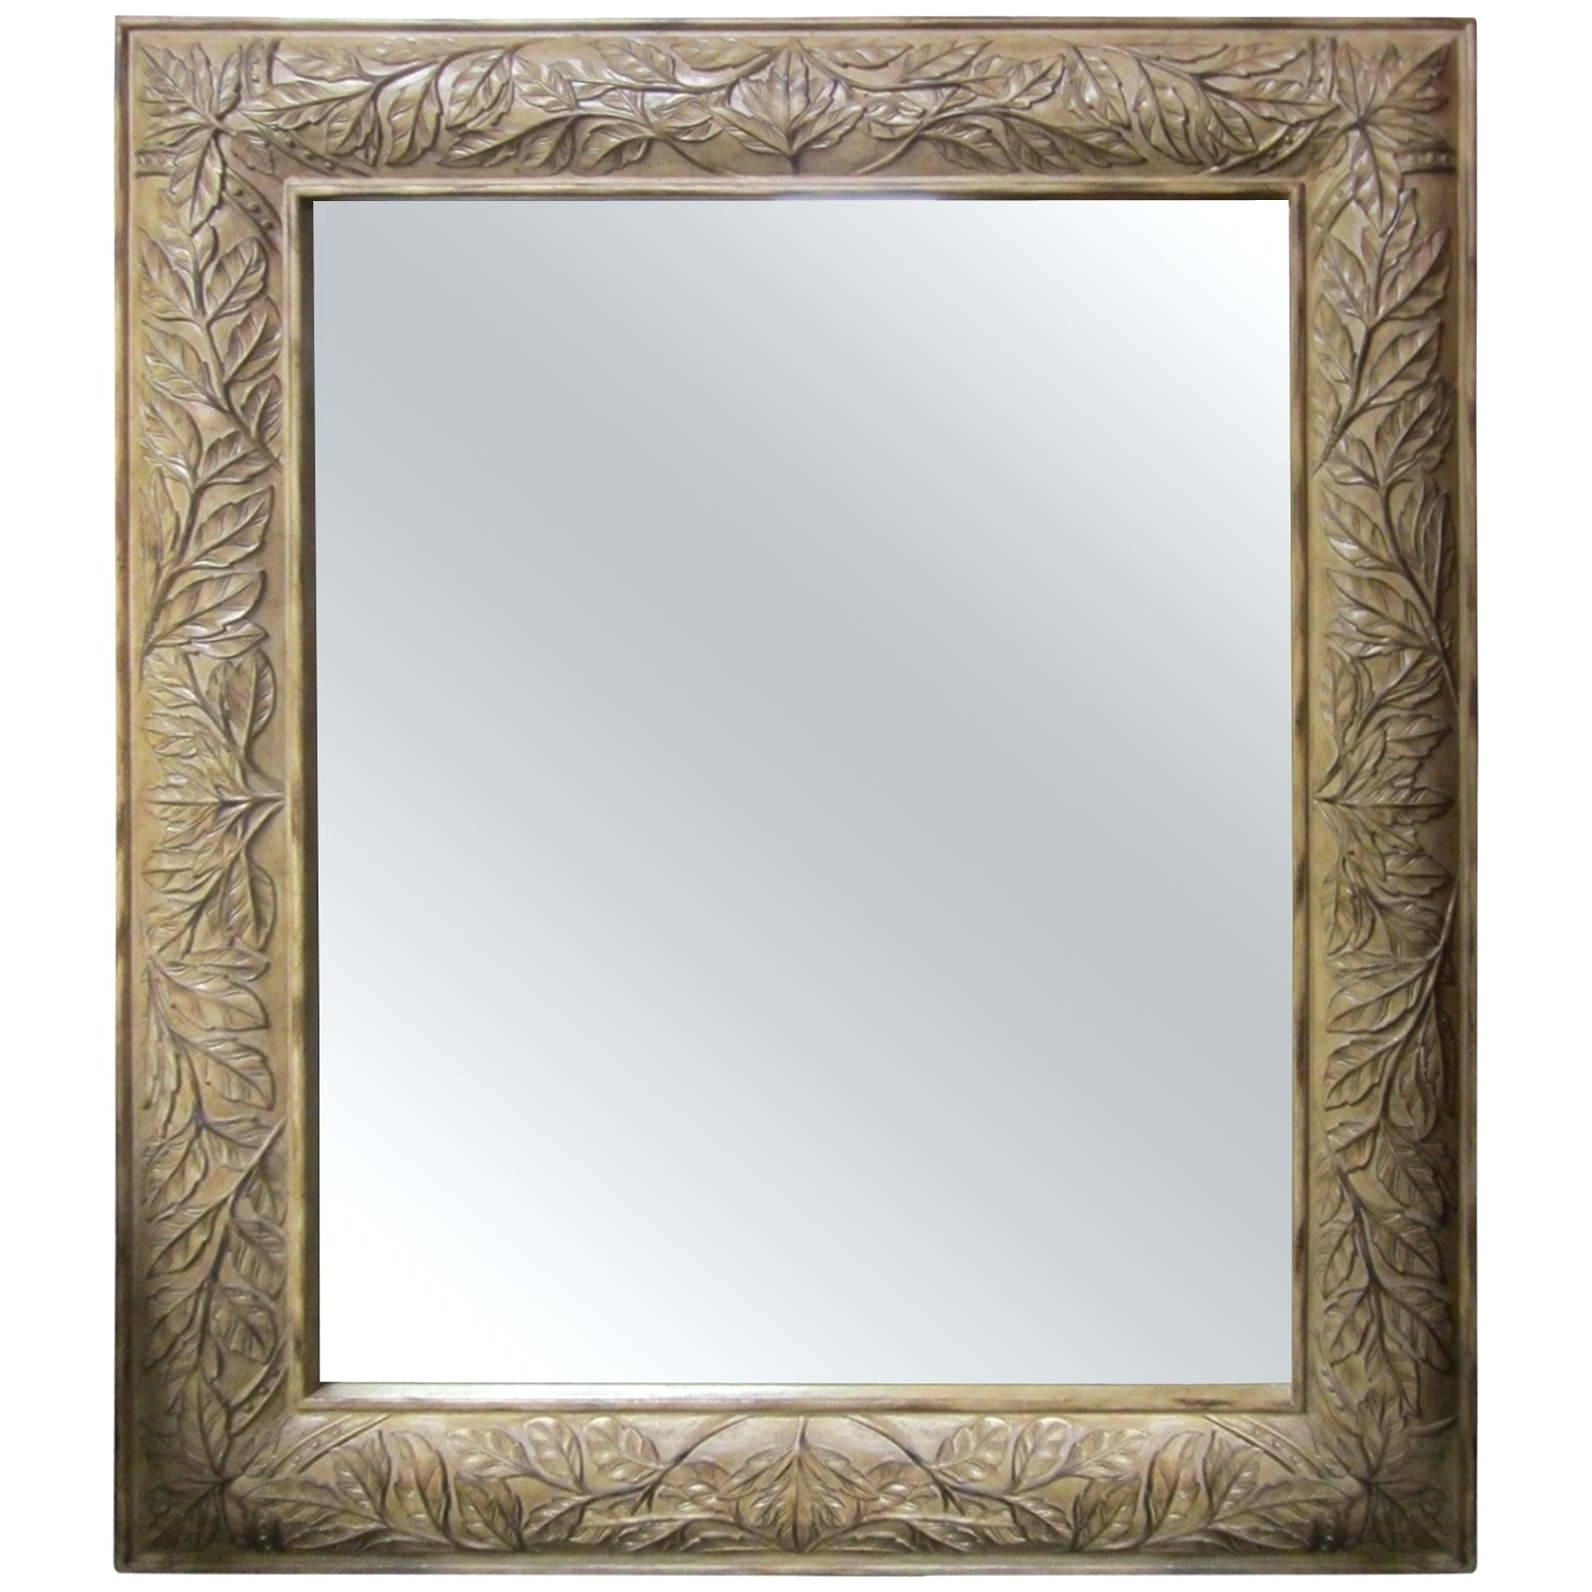 Large Wall Mirror With Frame Of Floor A Carved Wood For Sale At With Recent Large Wall Mirrors With Frame (View 10 of 20)